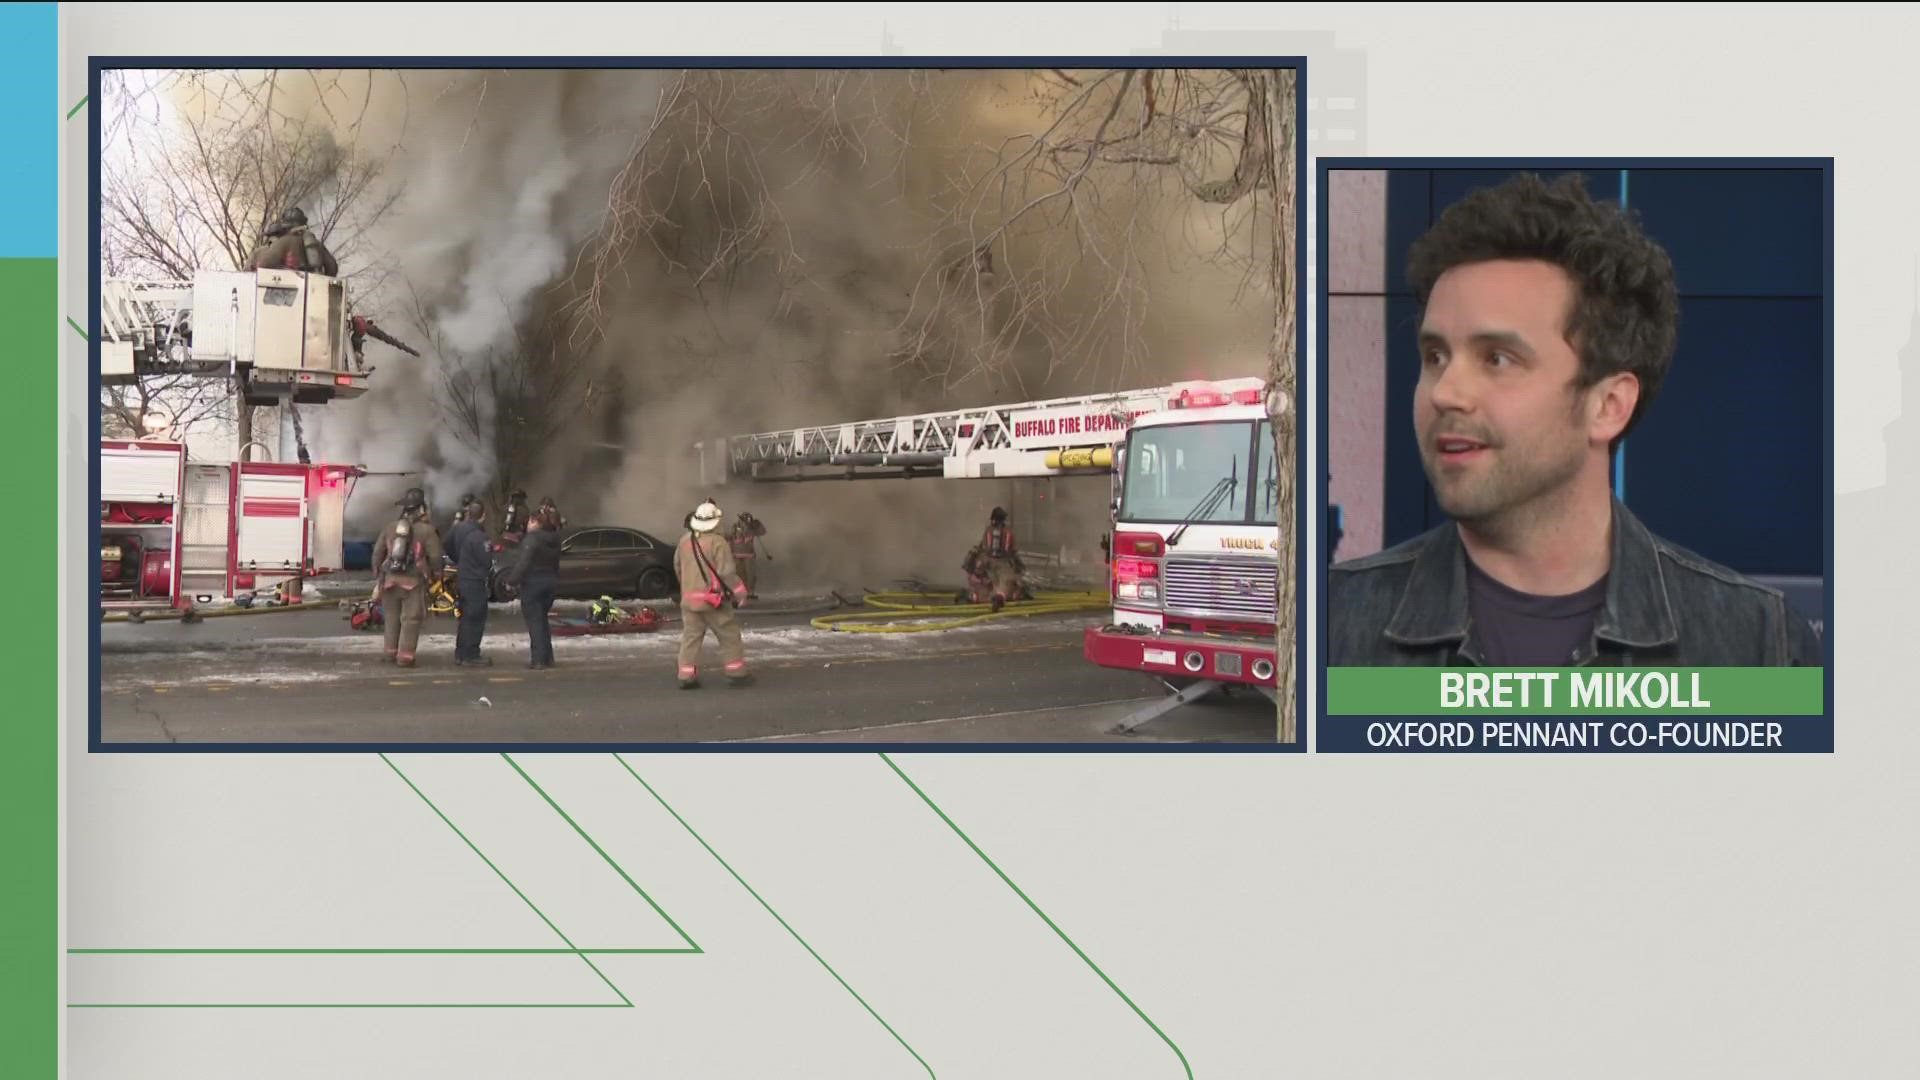 Brett Mikoll, the co-founder and creative director of Oxford Pennant, talked about how they are helping out firefighter Jason Arno's family this weekend.